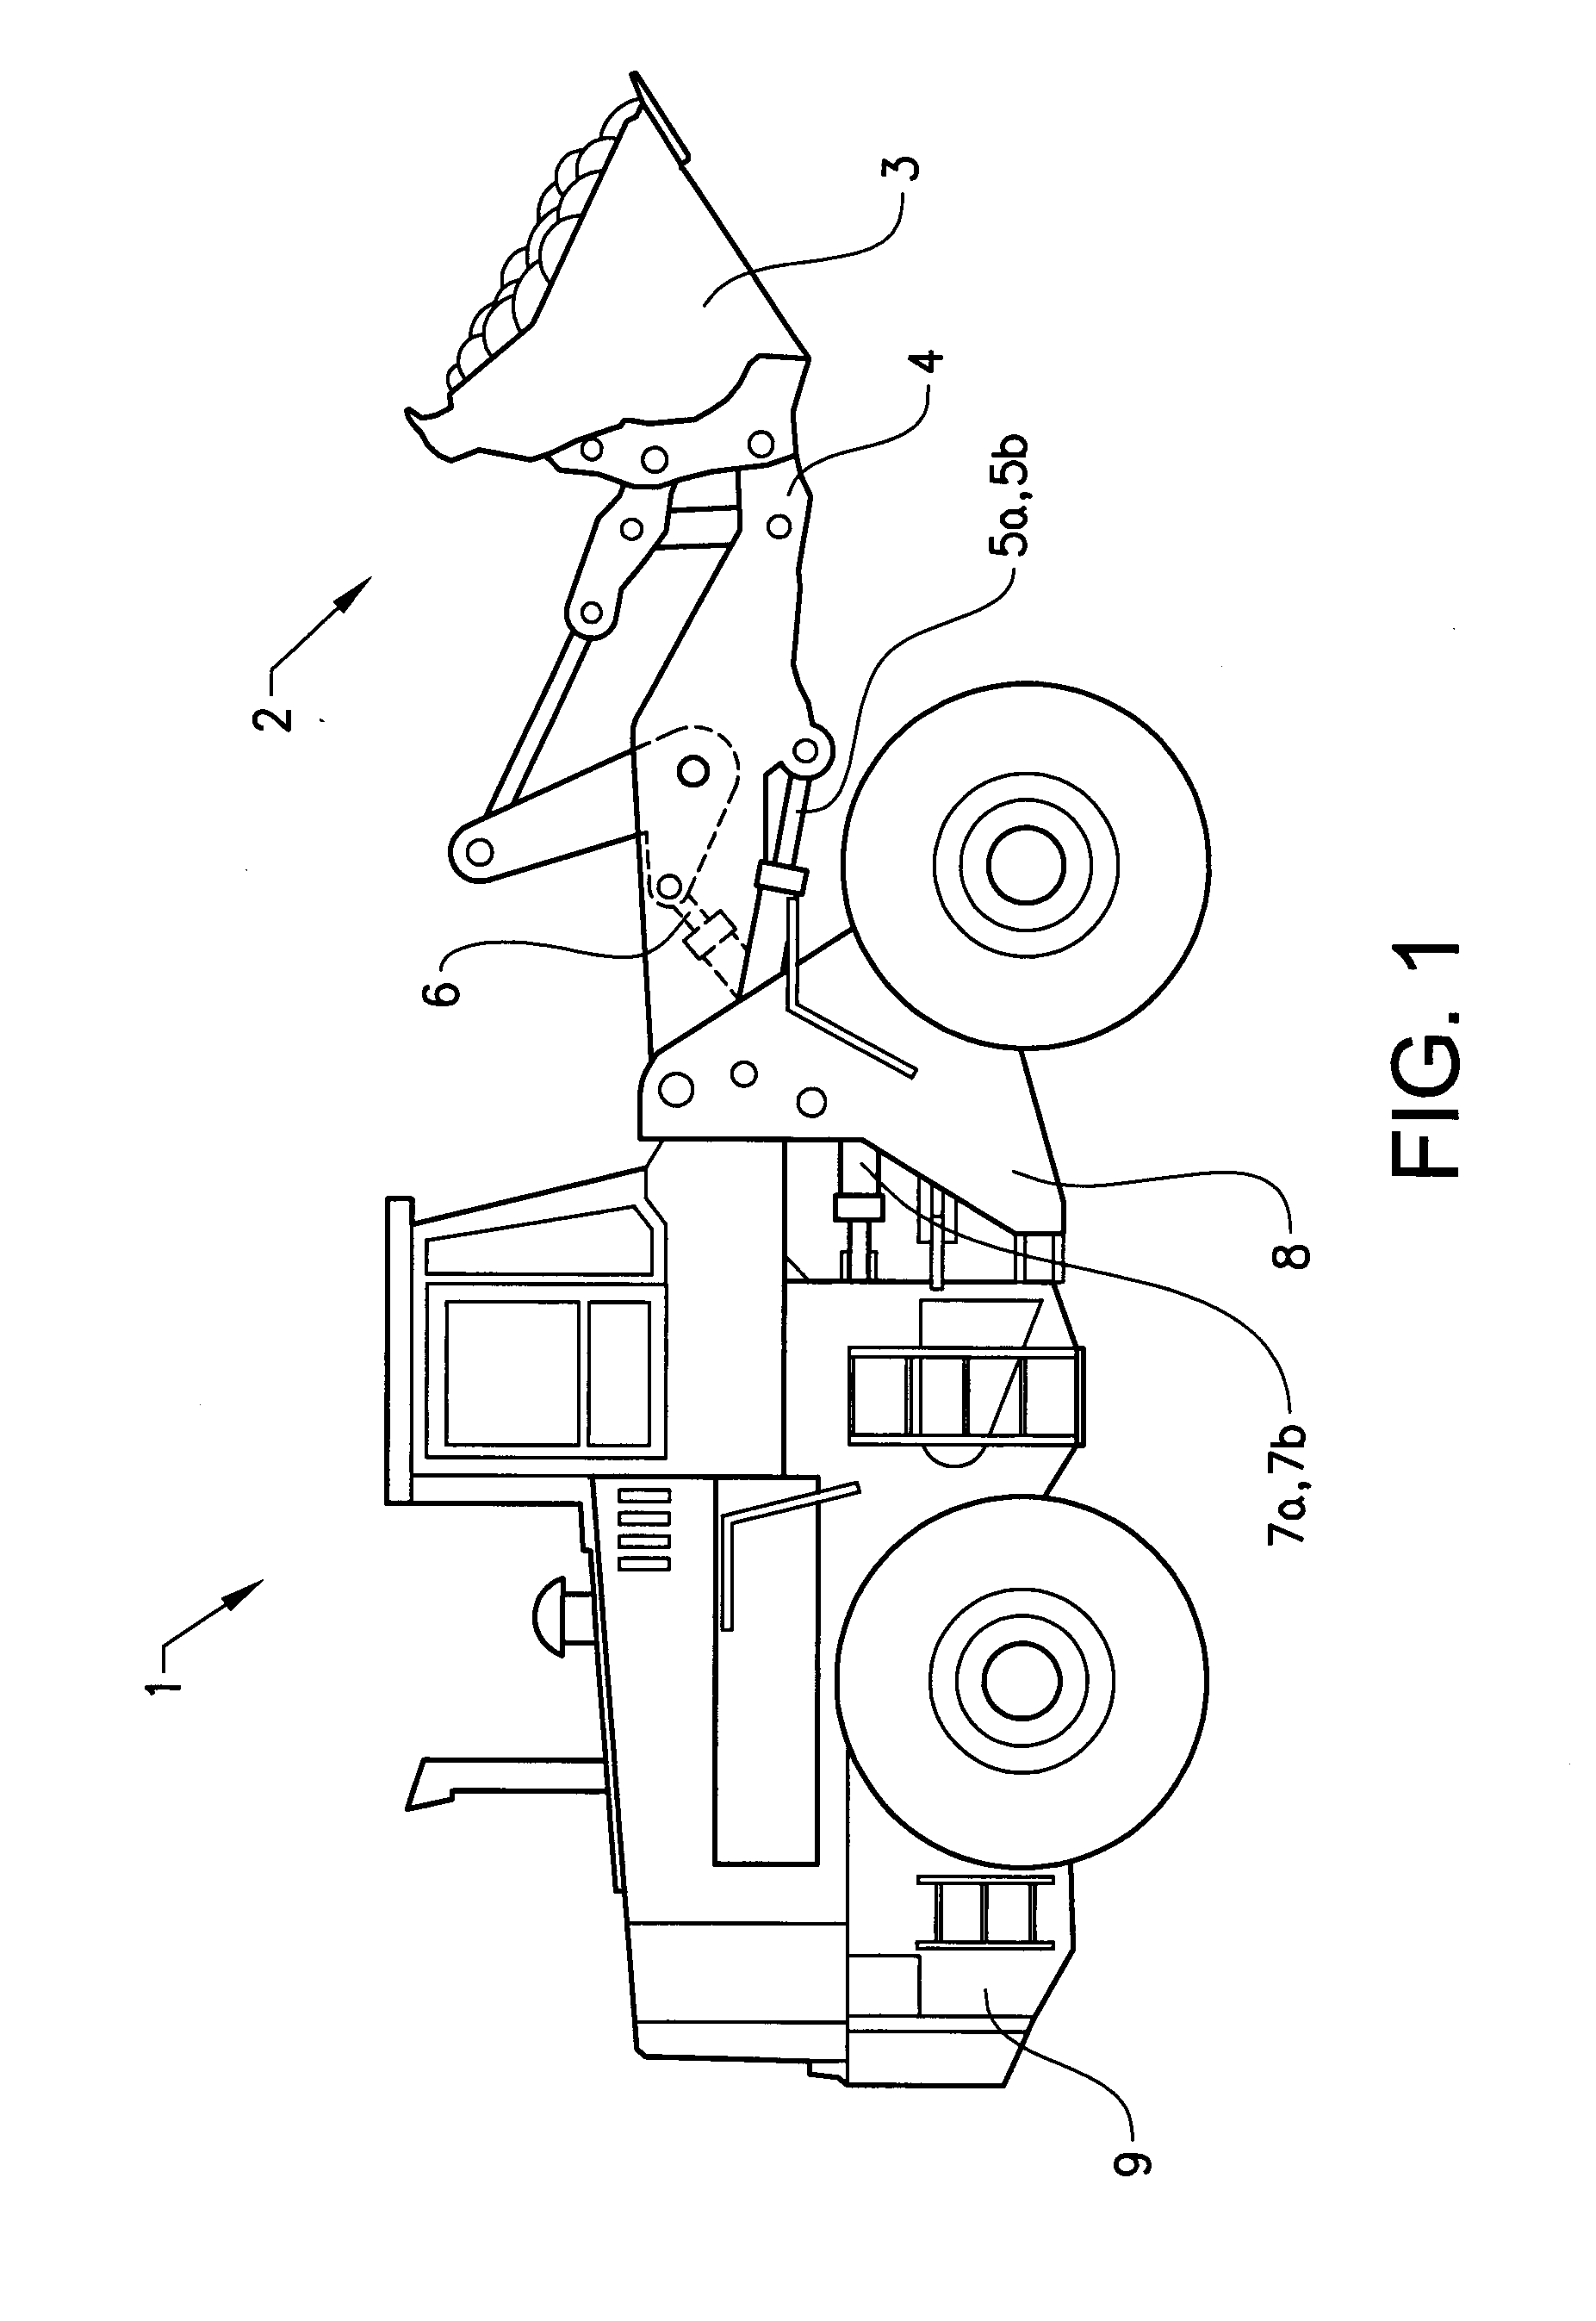 Method for controlling a hydraulic system of a working machine